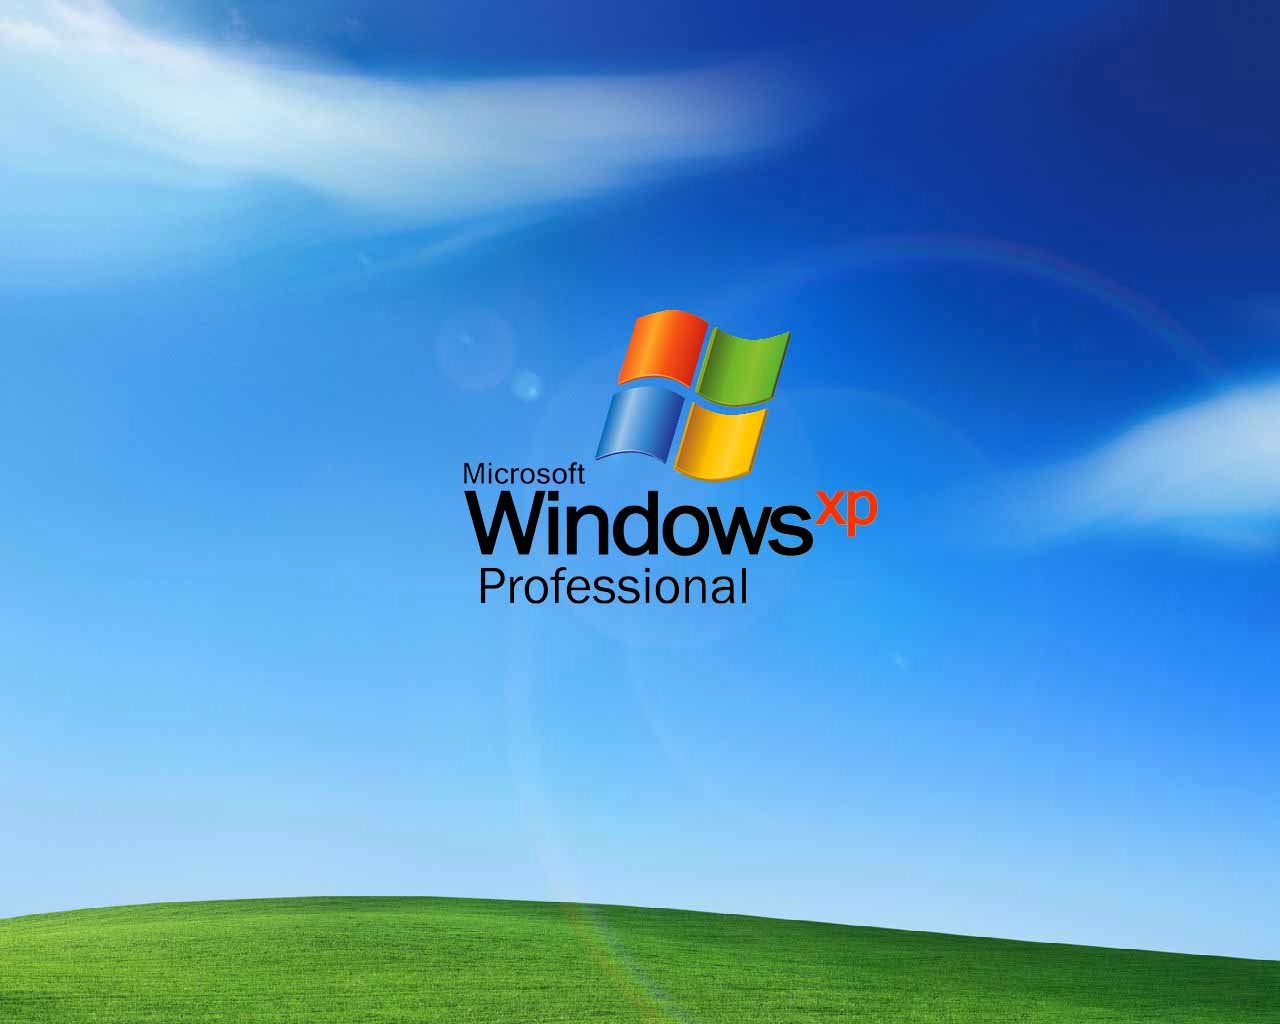 HD Wallpapers 1080p windows xp | The Best Wallpapers